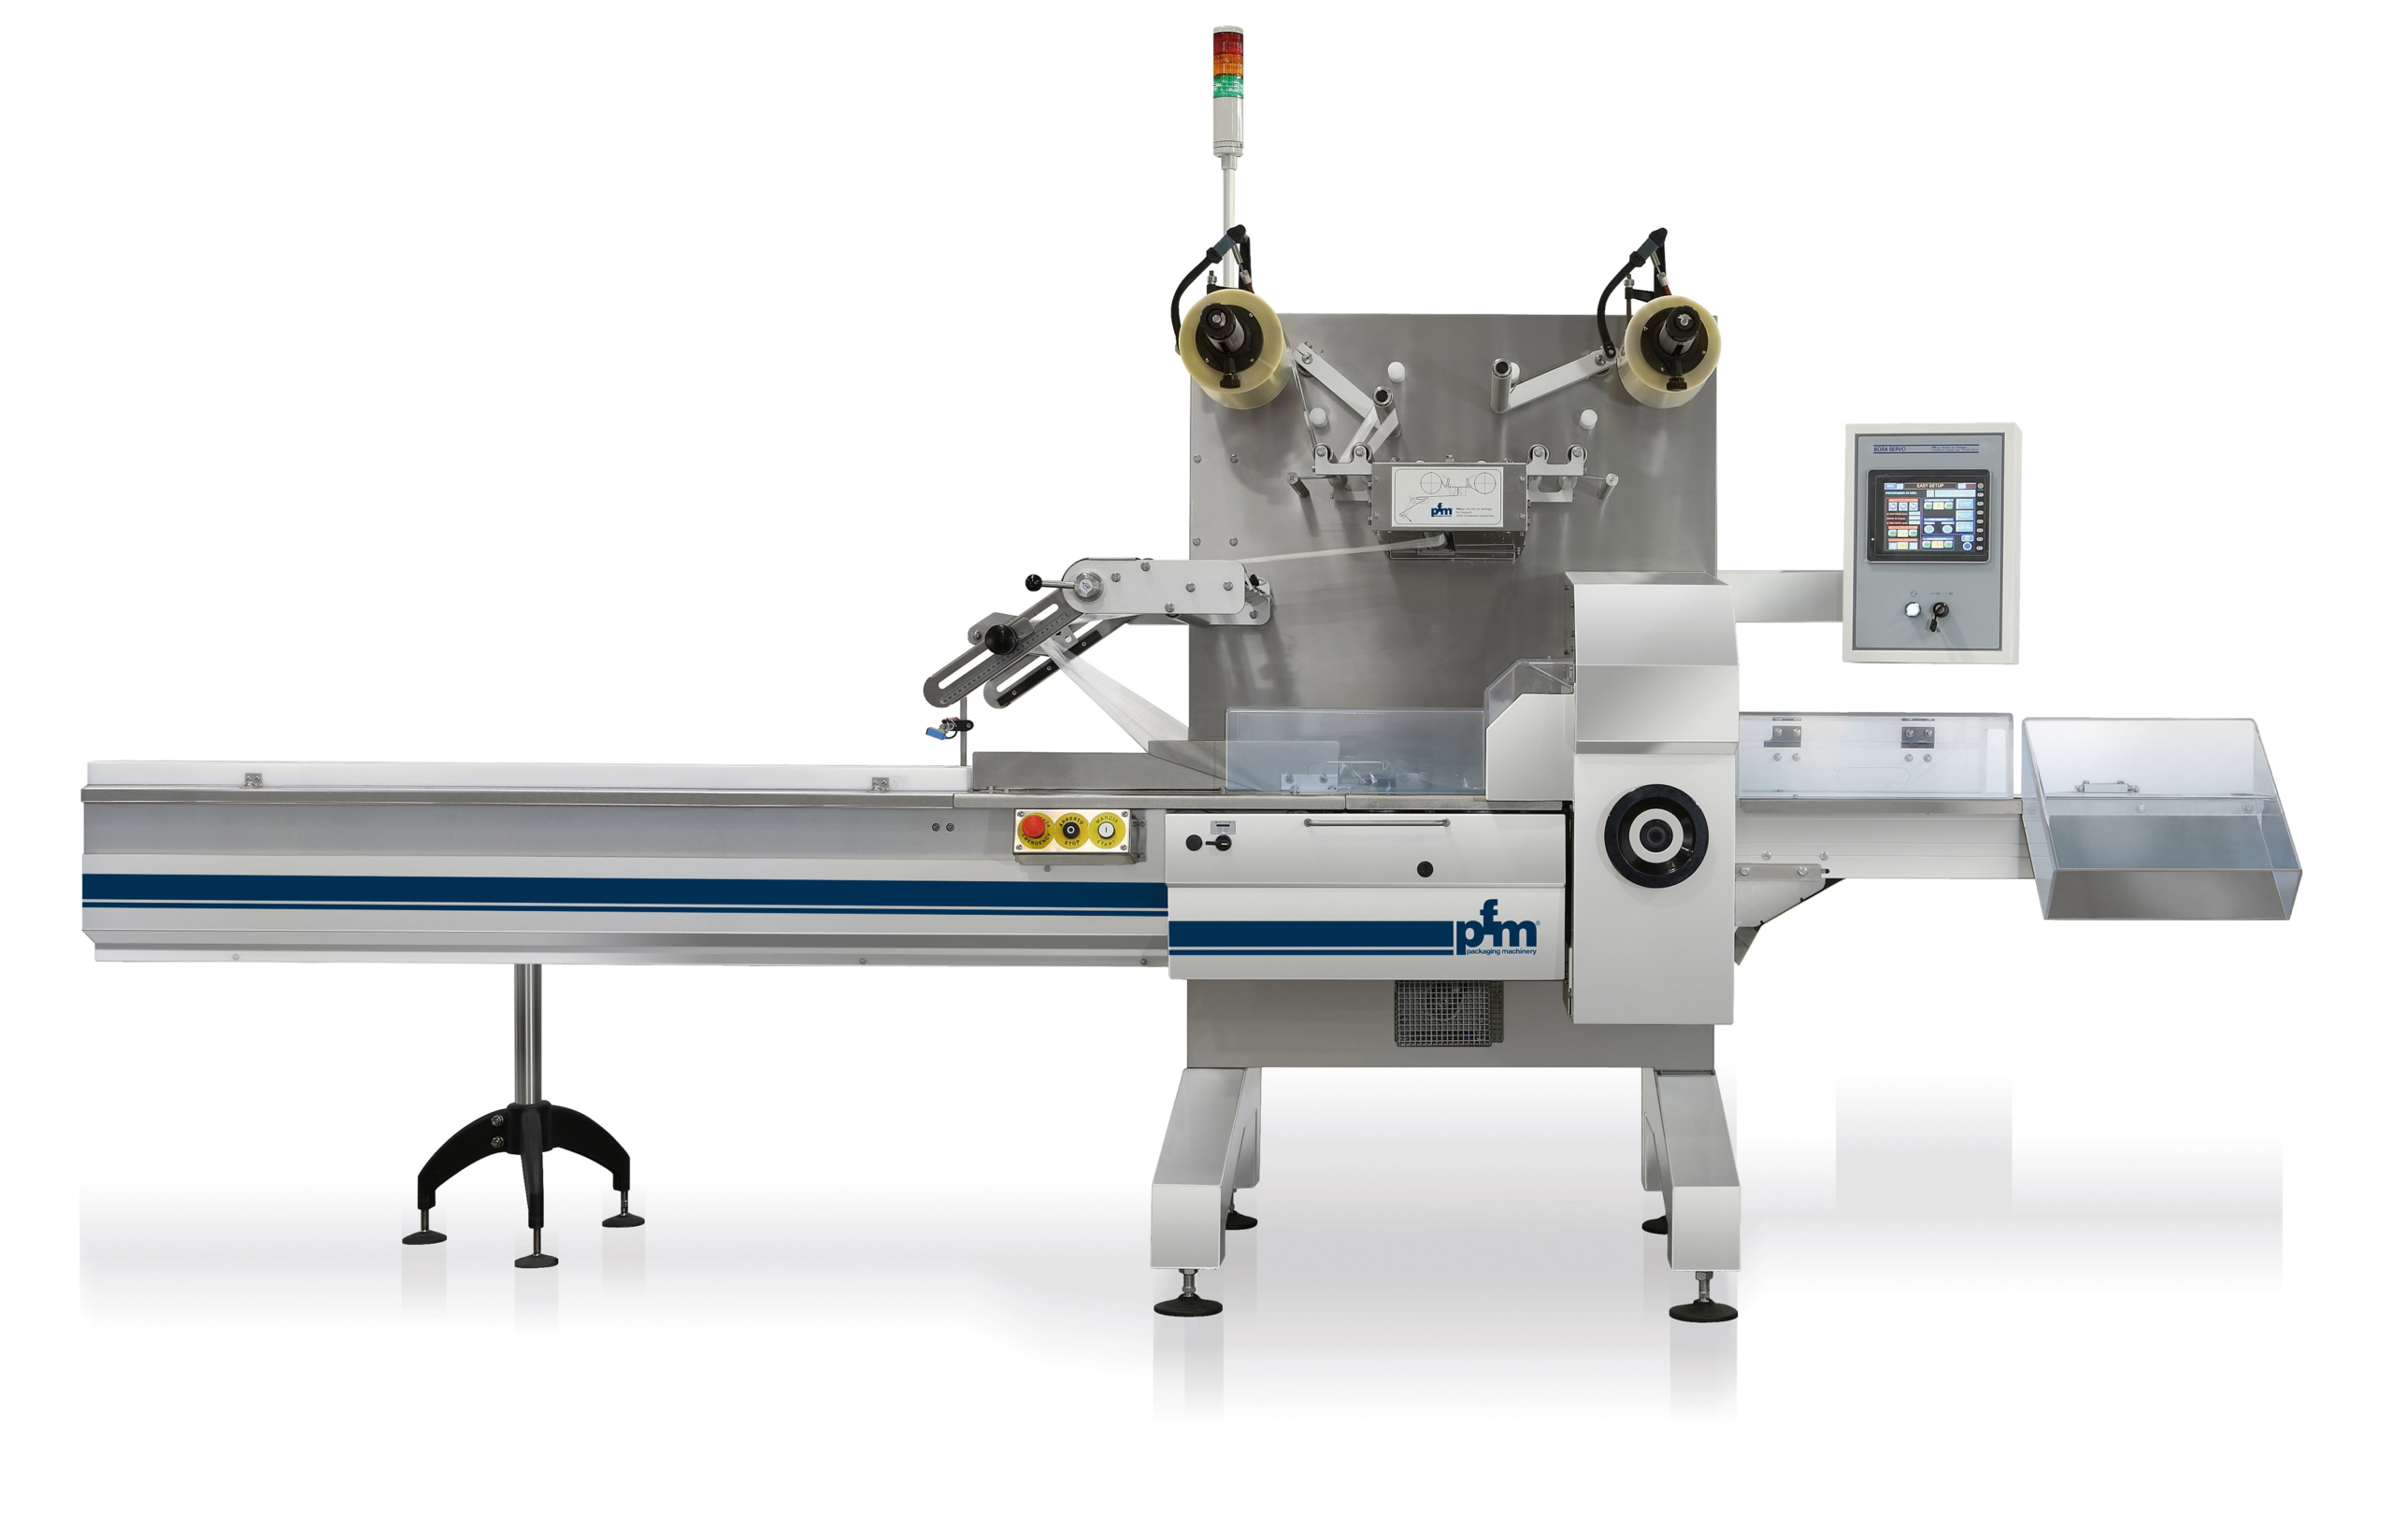 The BORA is a horizontal flow-pack type packaging machine for producing packs sealed on three sides from a roll of heat-sealable packaging film.